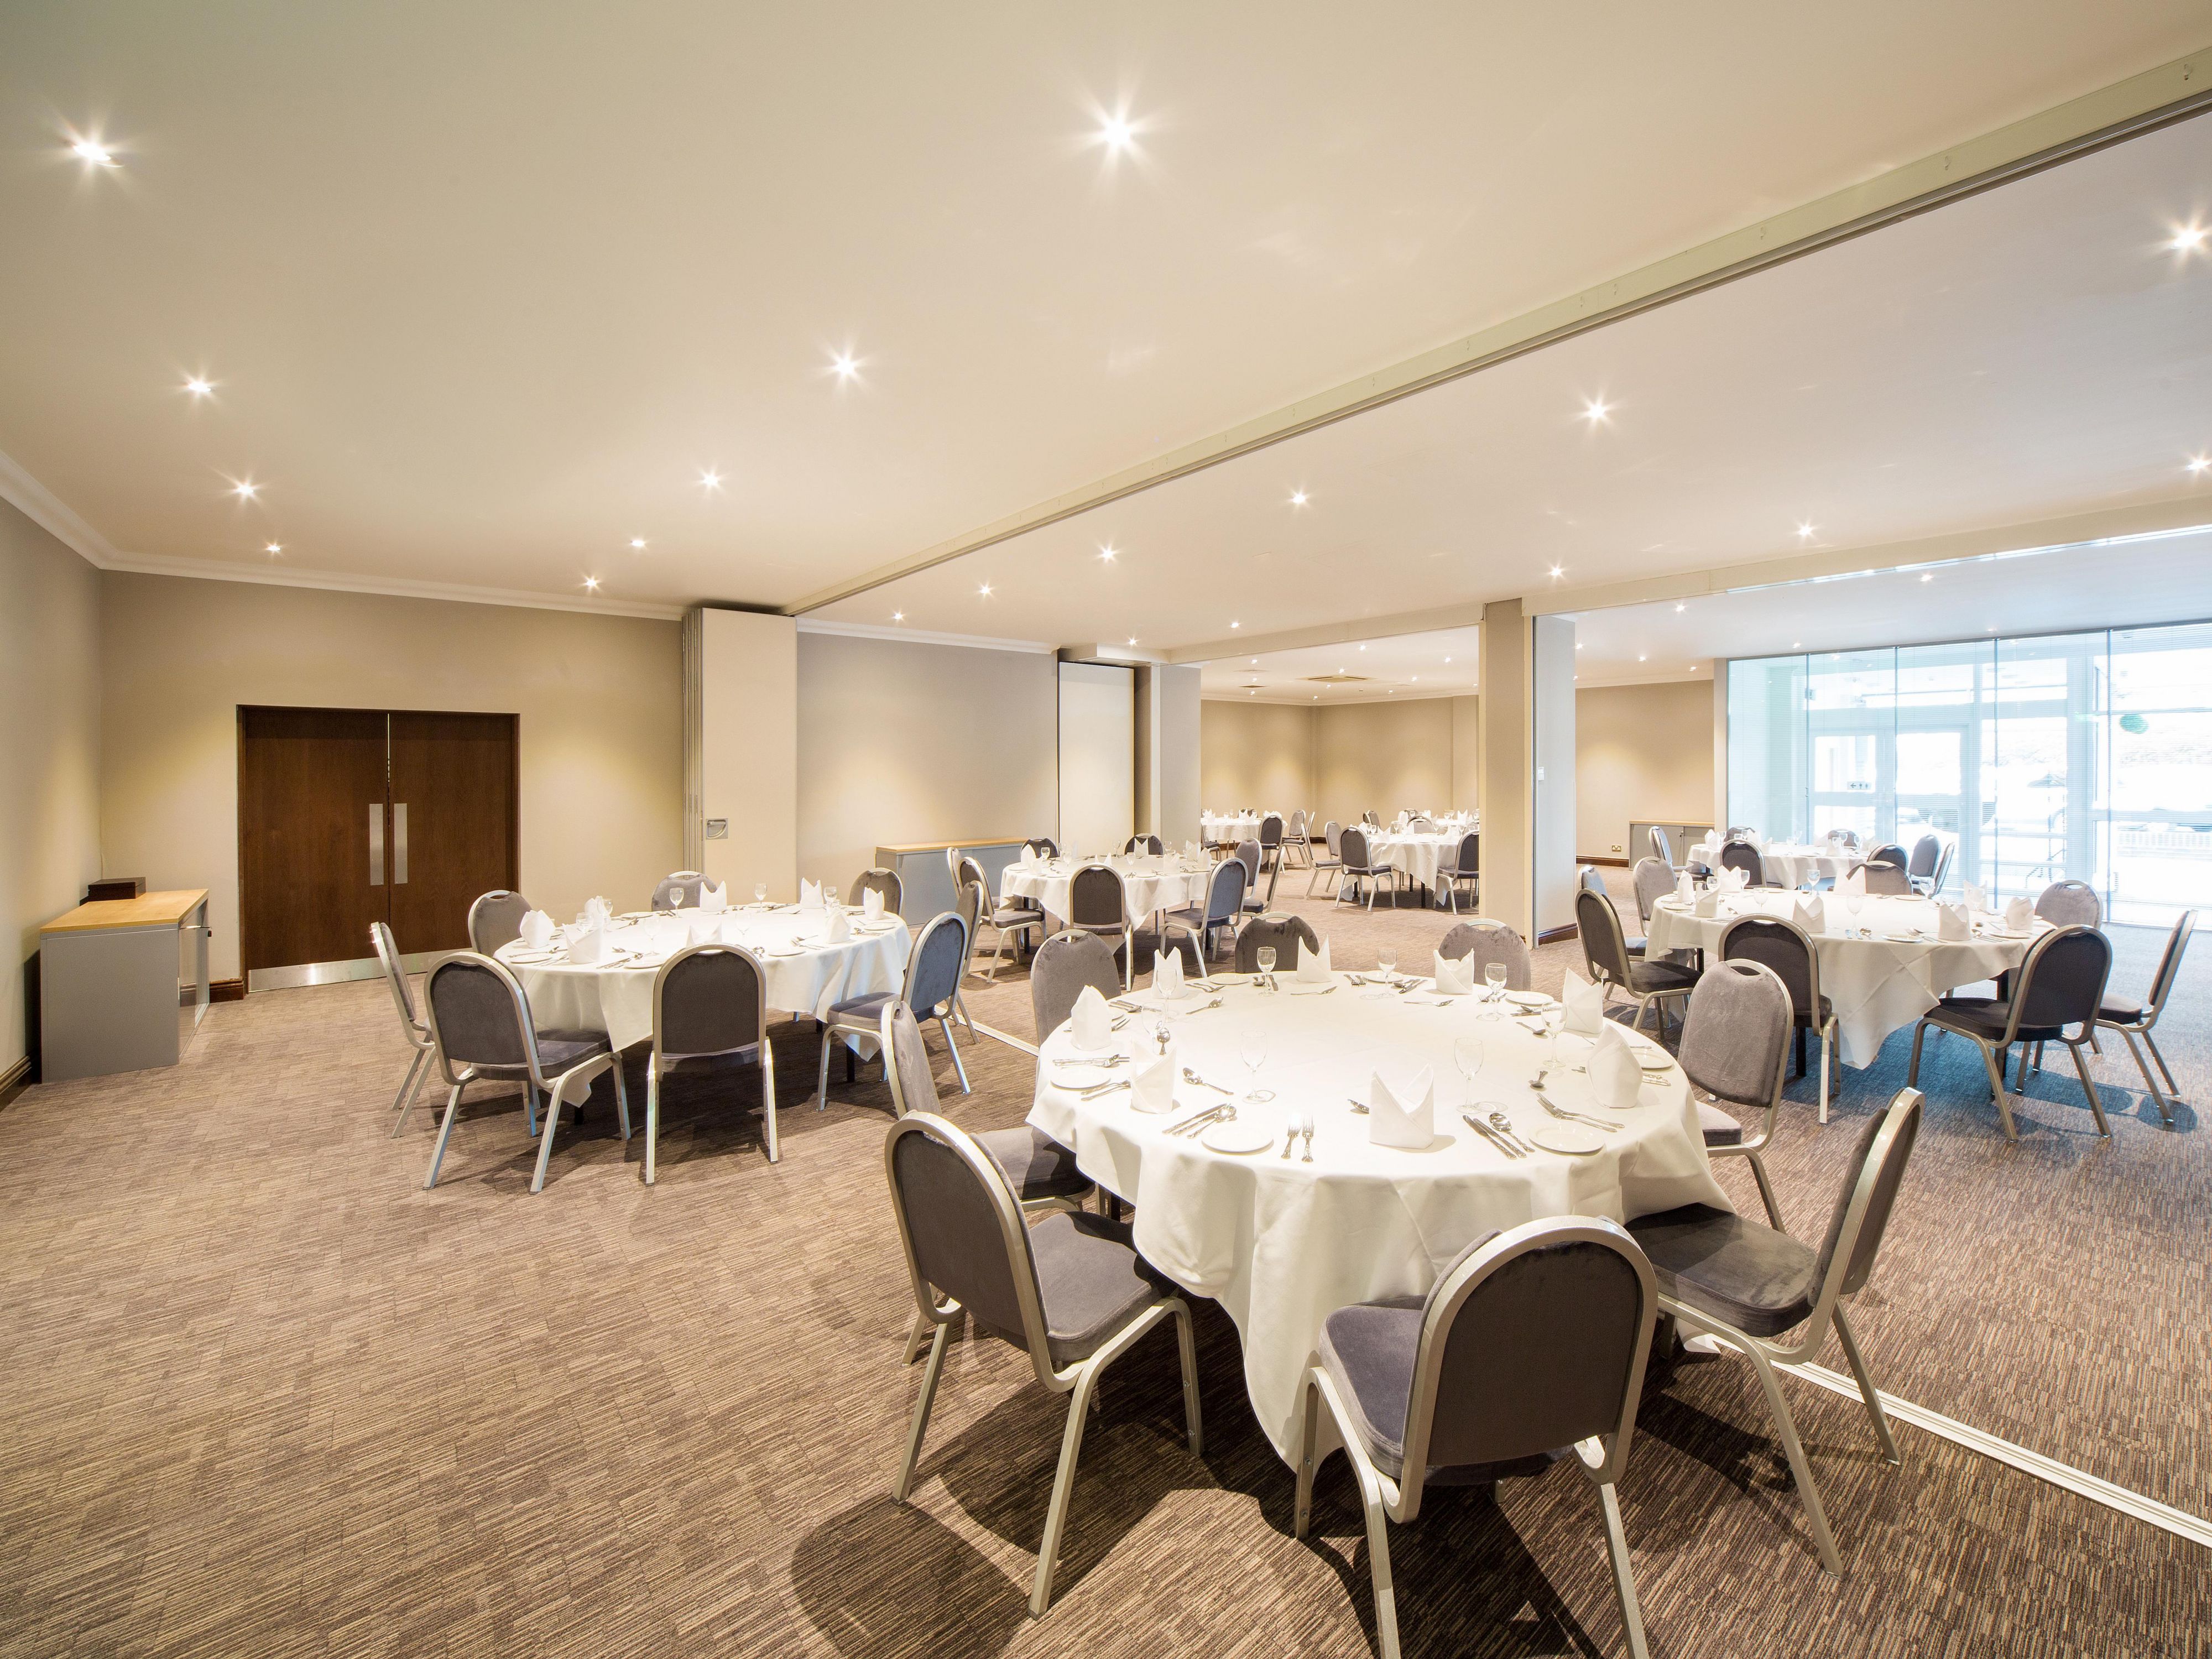 Here at the Holiday Inn Southampton, we offer a number of private dining solutions. Whether you're looking to organize an intimate dinner for a small group, or a large celebratory dinner for up to 60 guests, we have the perfect space for your event.